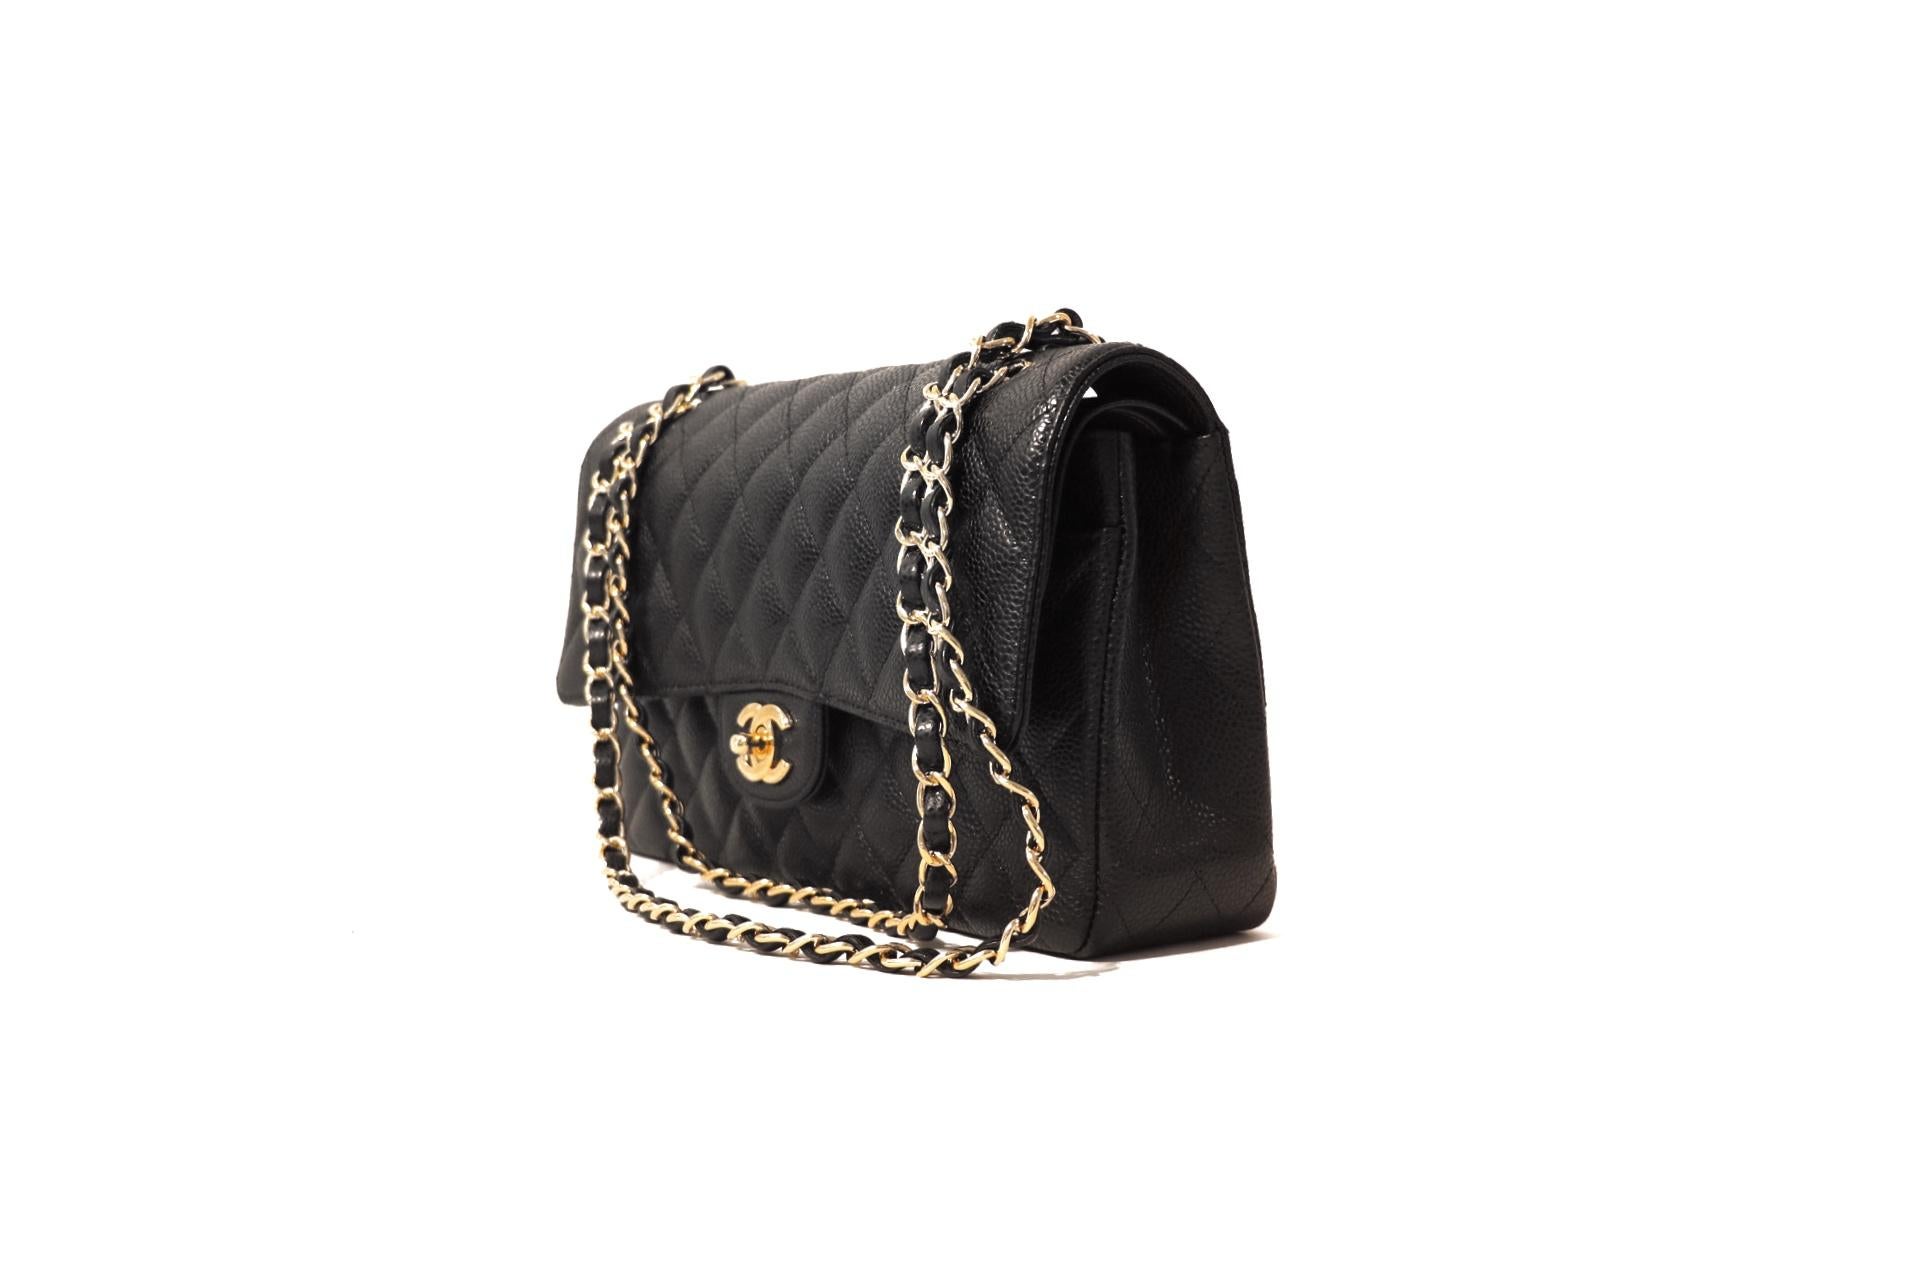 Chanel Black Caviar Leather Medium Classic Bag In Excellent Condition In Palm Beach, FL